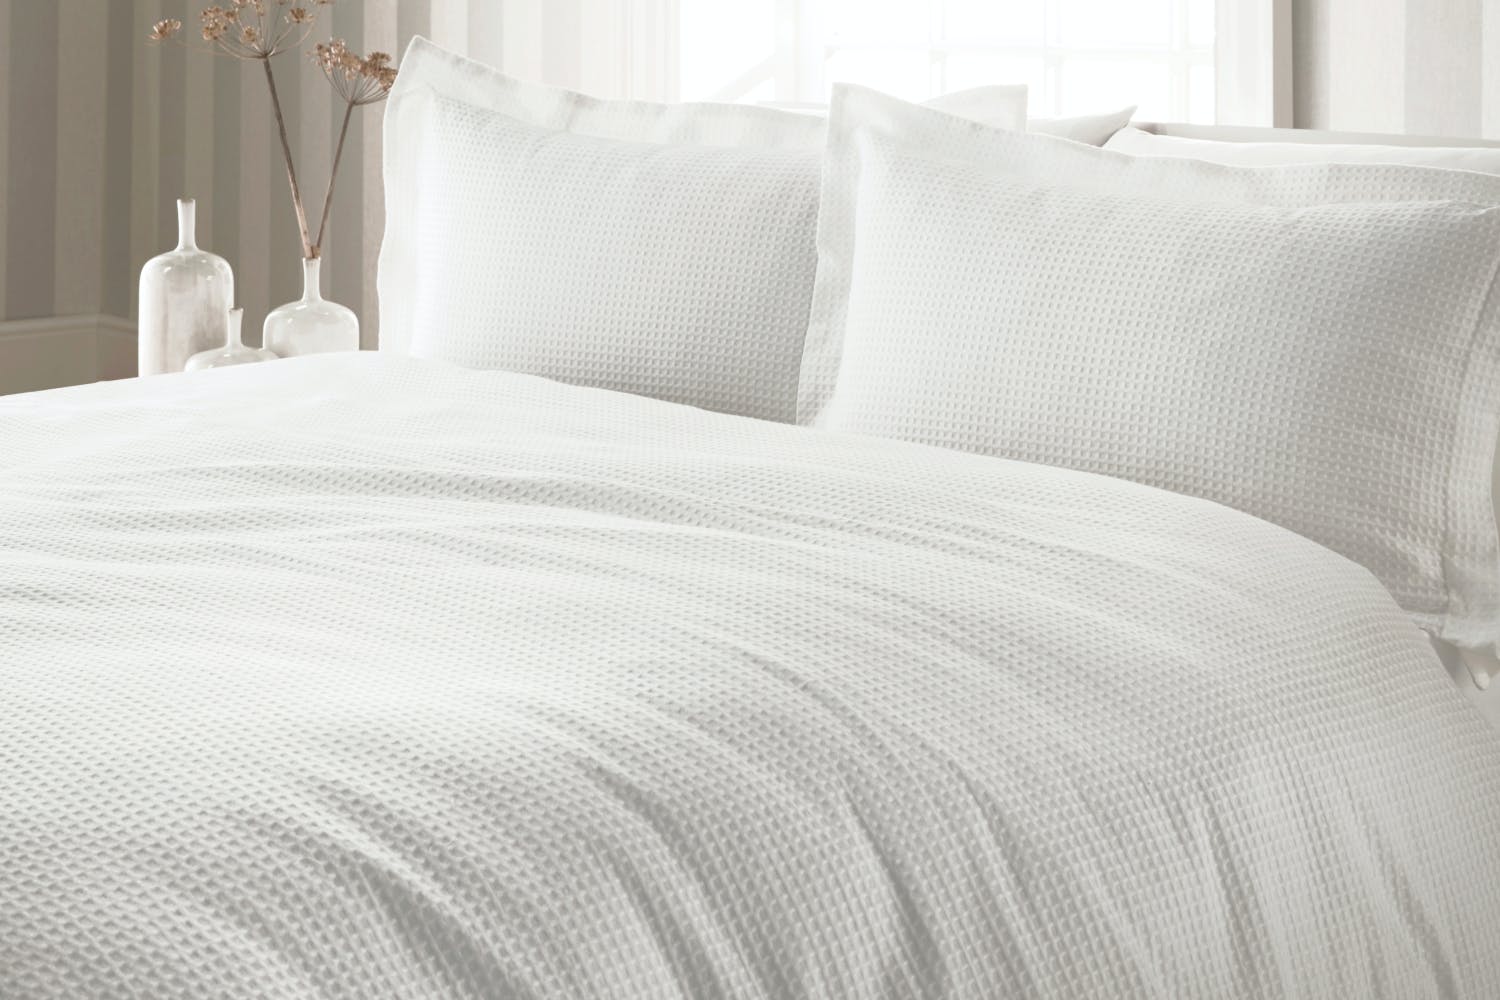 Outrageous Benefits of using Duvet covers